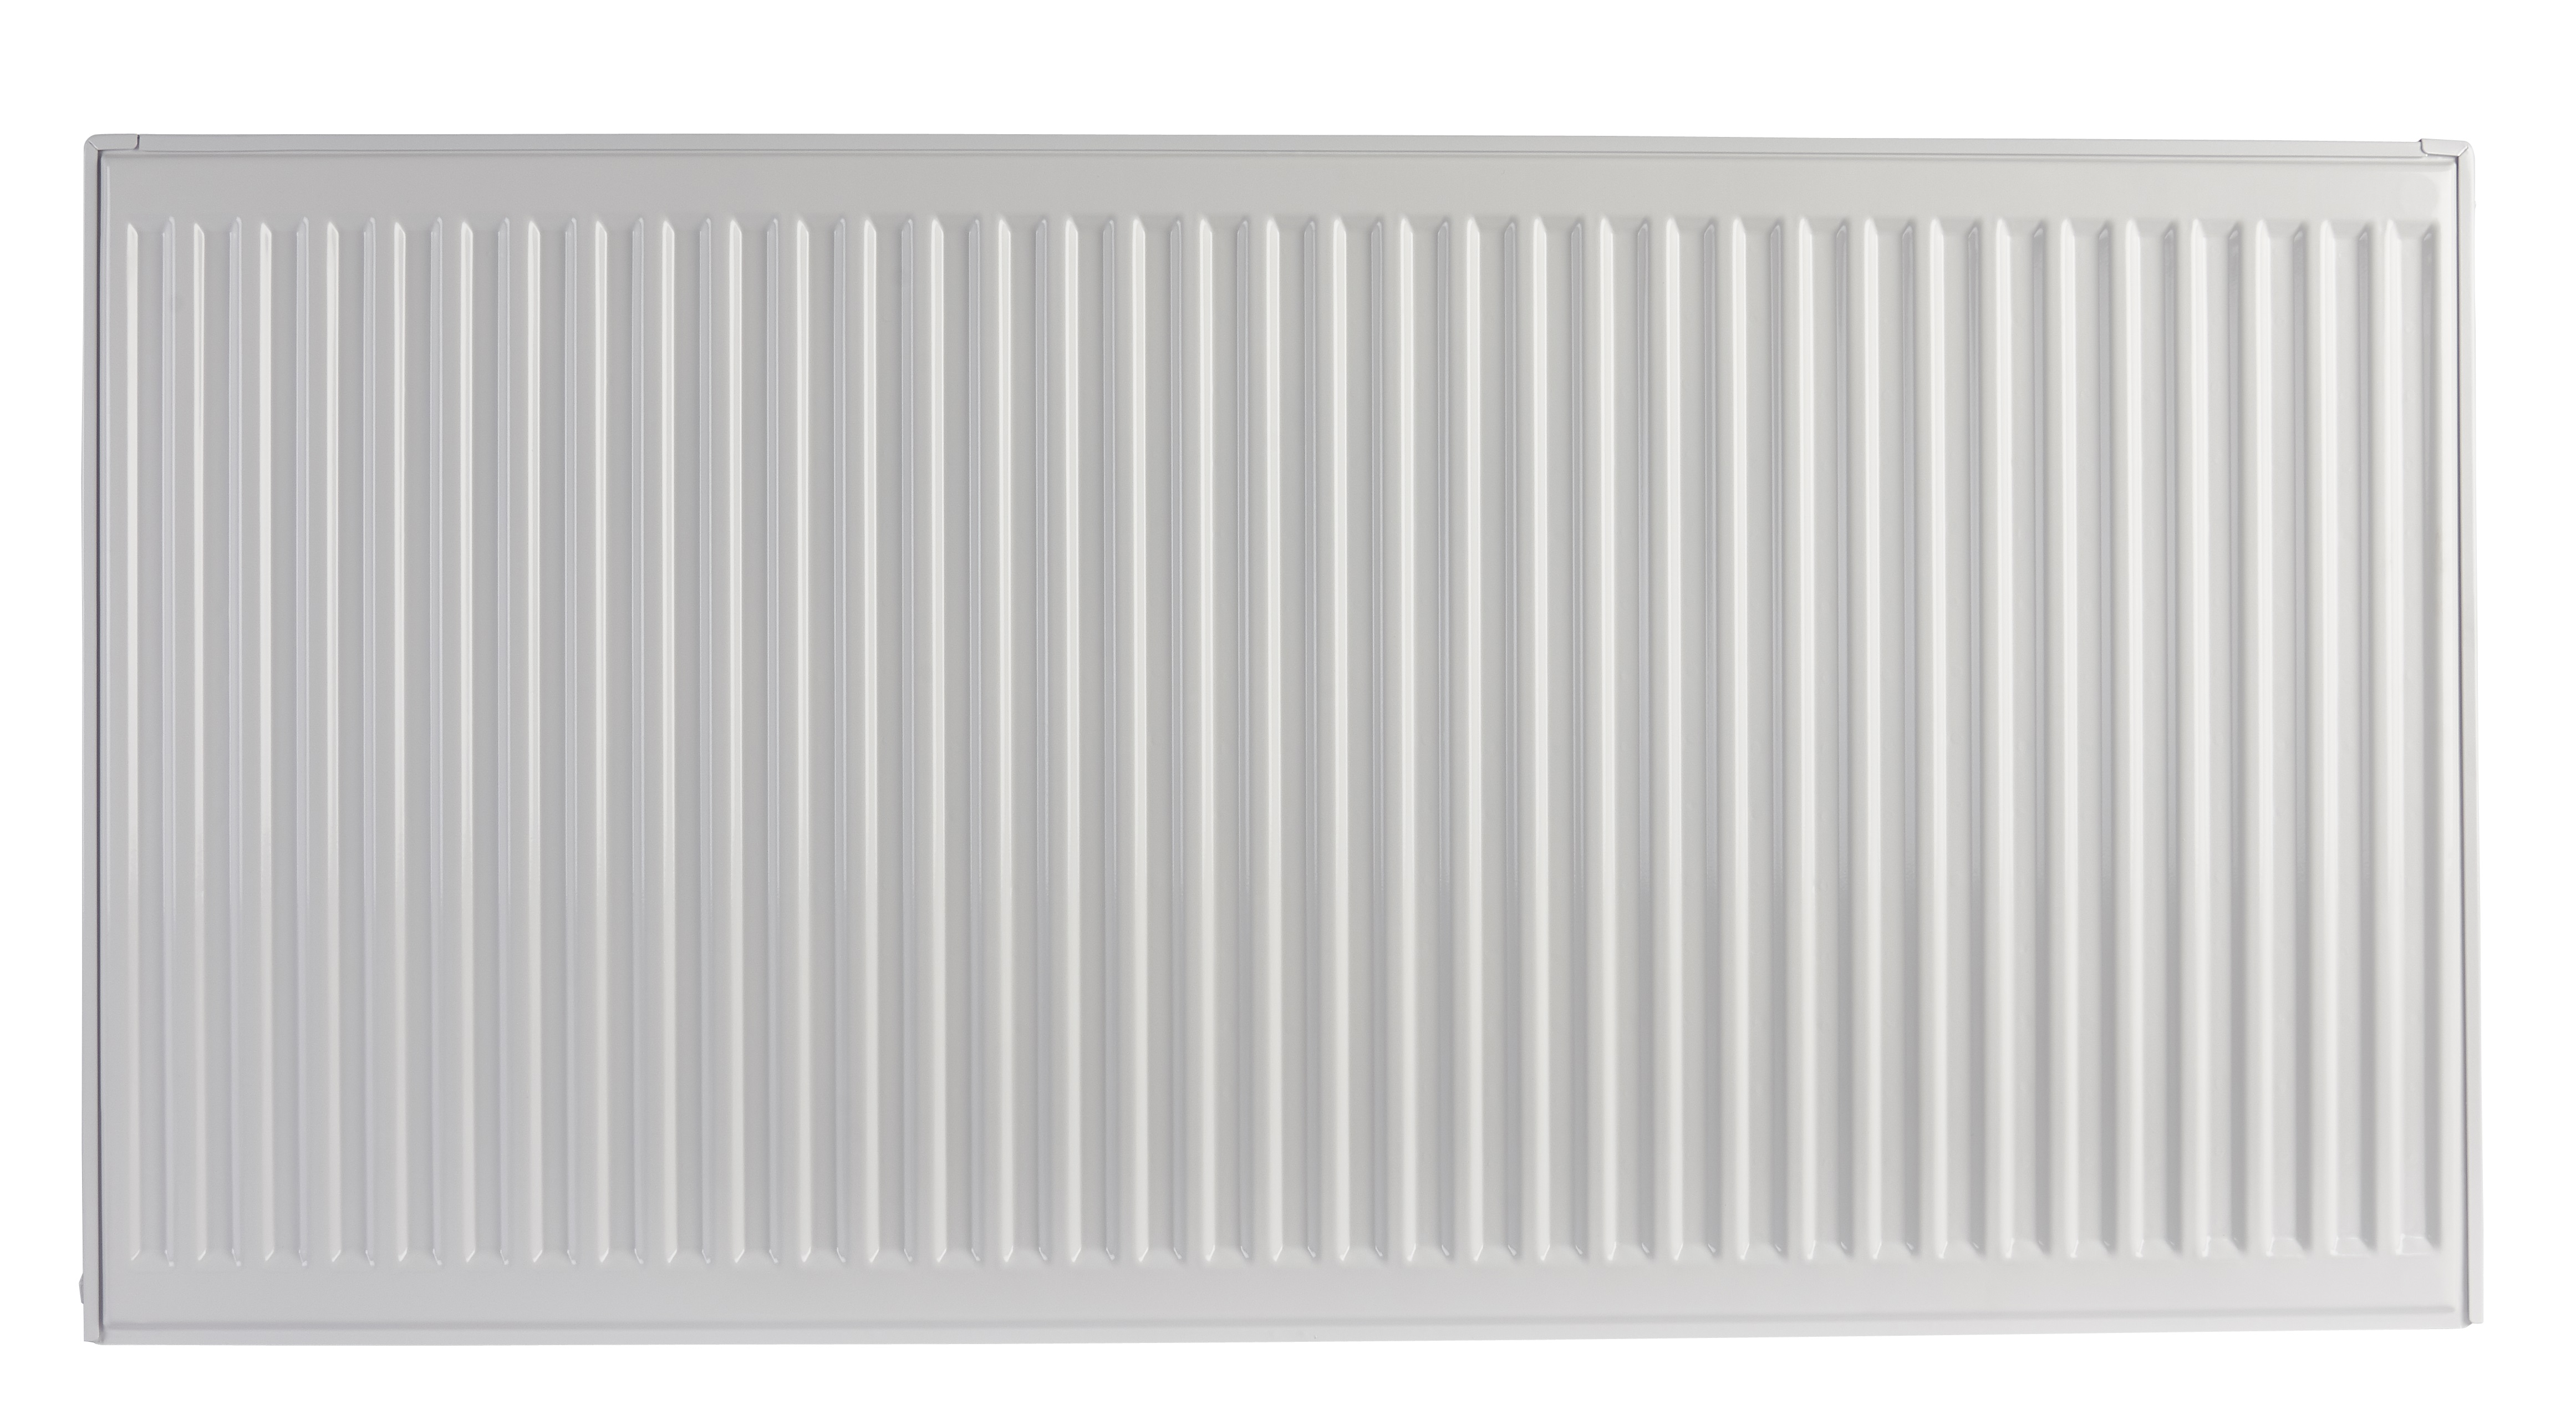 Homeline by Stelrad Type 21 Double Panel Plus Single Convector Radiator - 600 x 2000mm